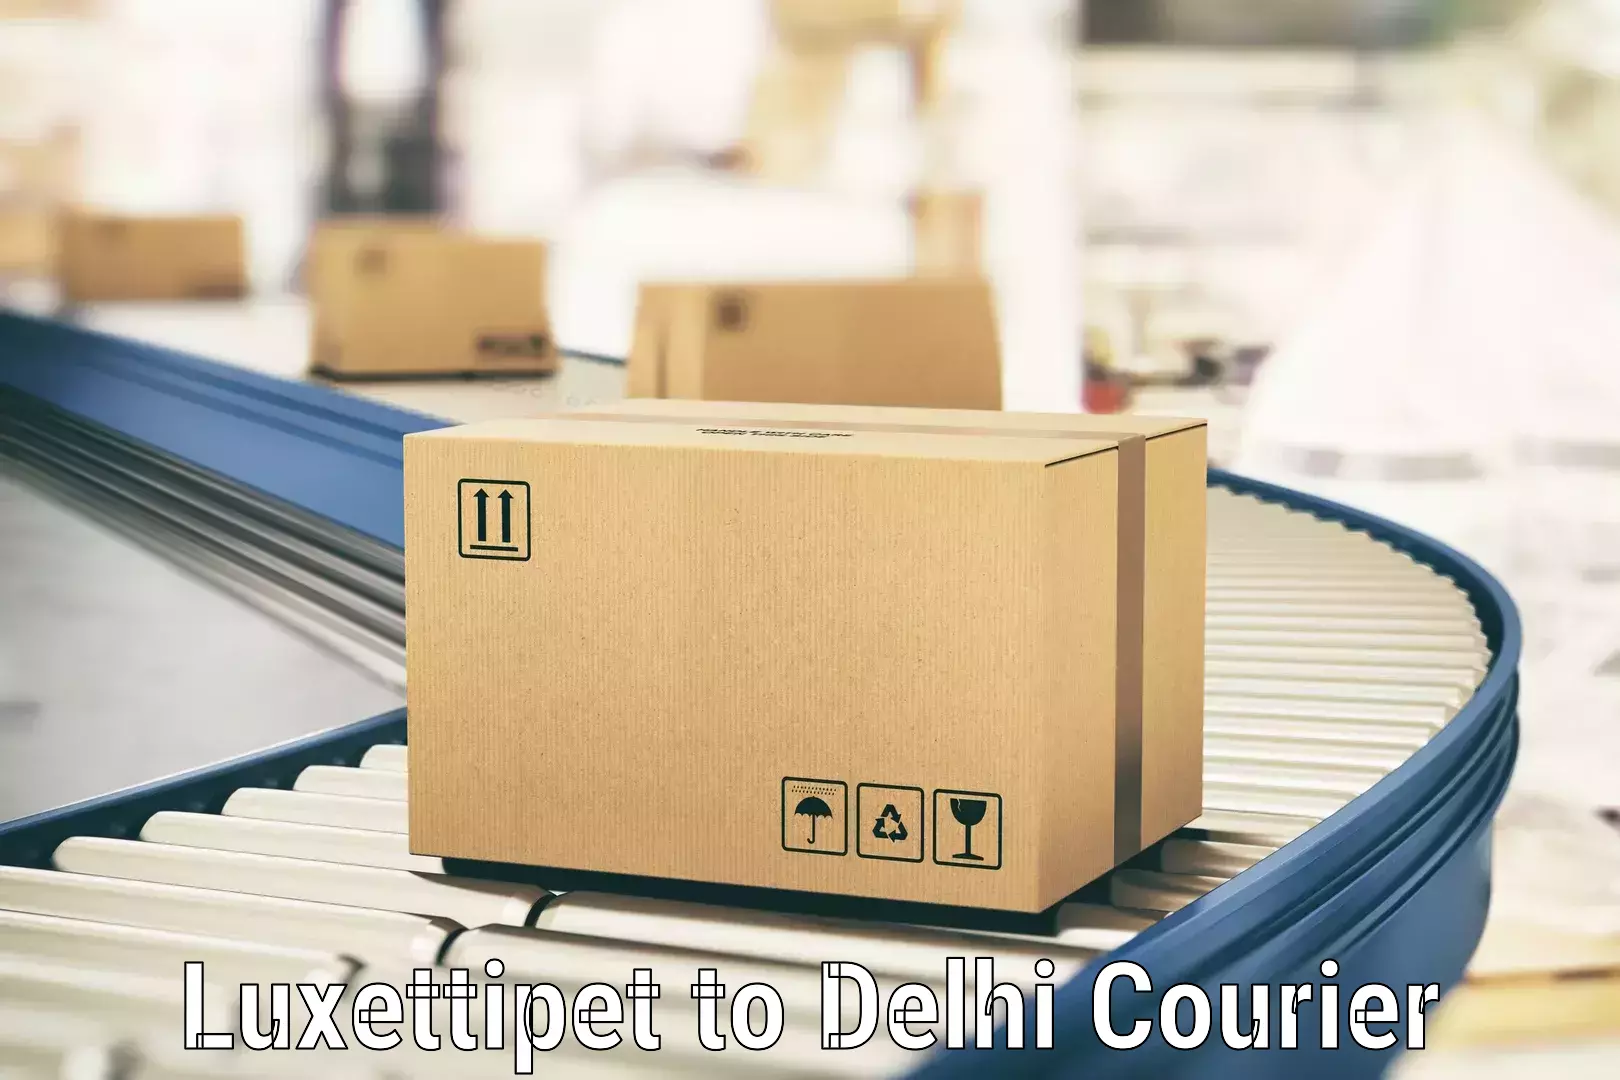 Nationwide shipping coverage Luxettipet to University of Delhi